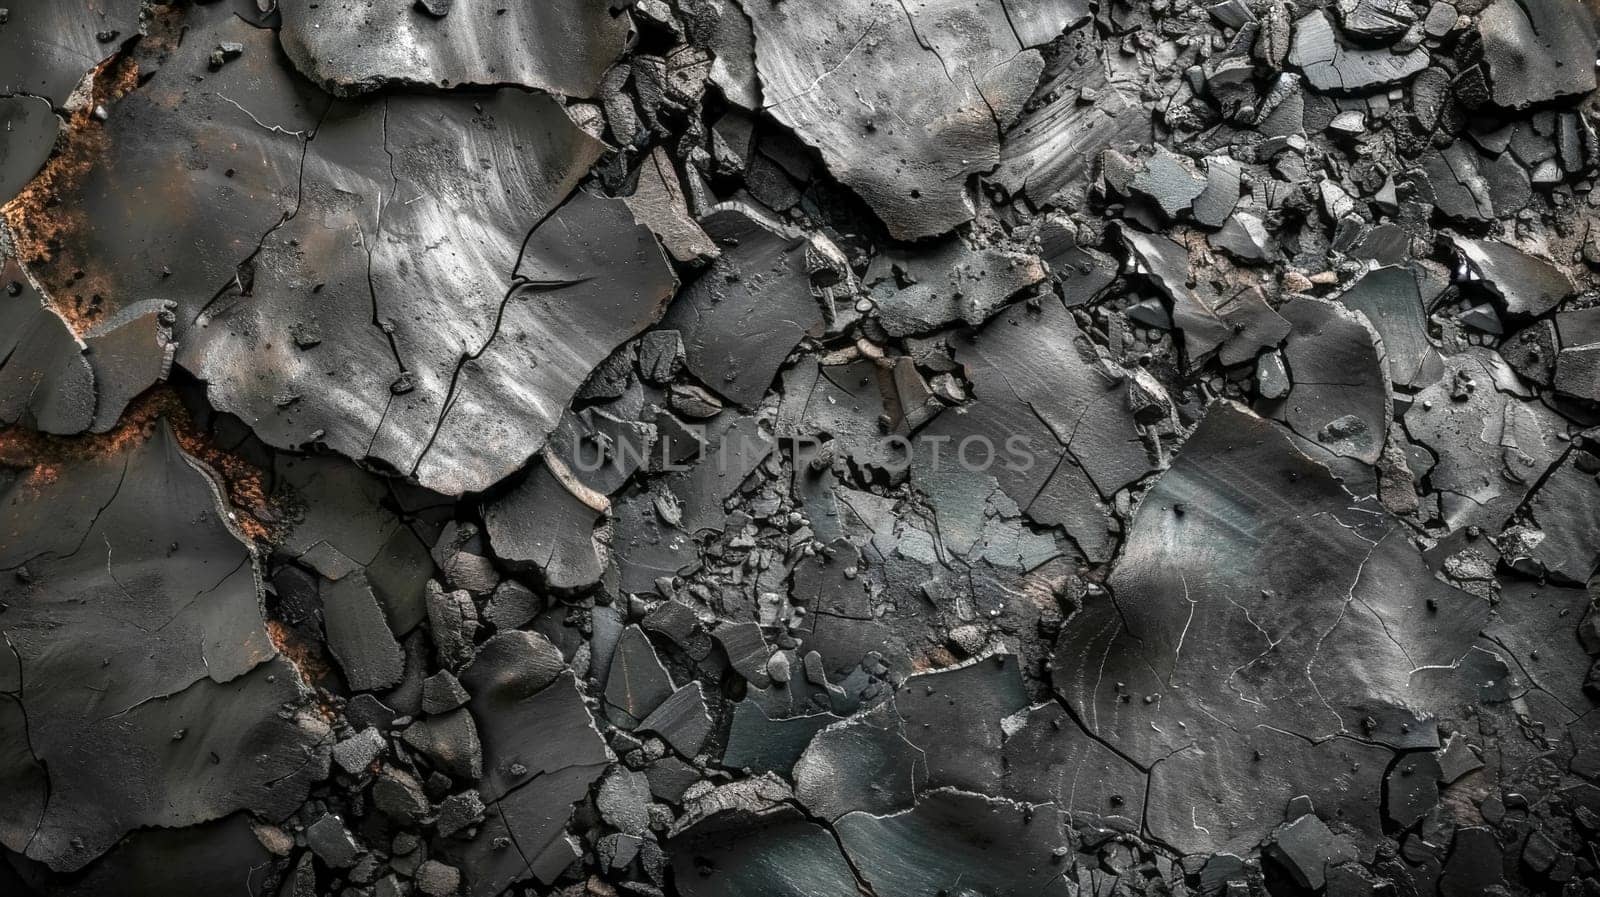 Close-up image showcasing detailed texture of cracked and peeling black paint